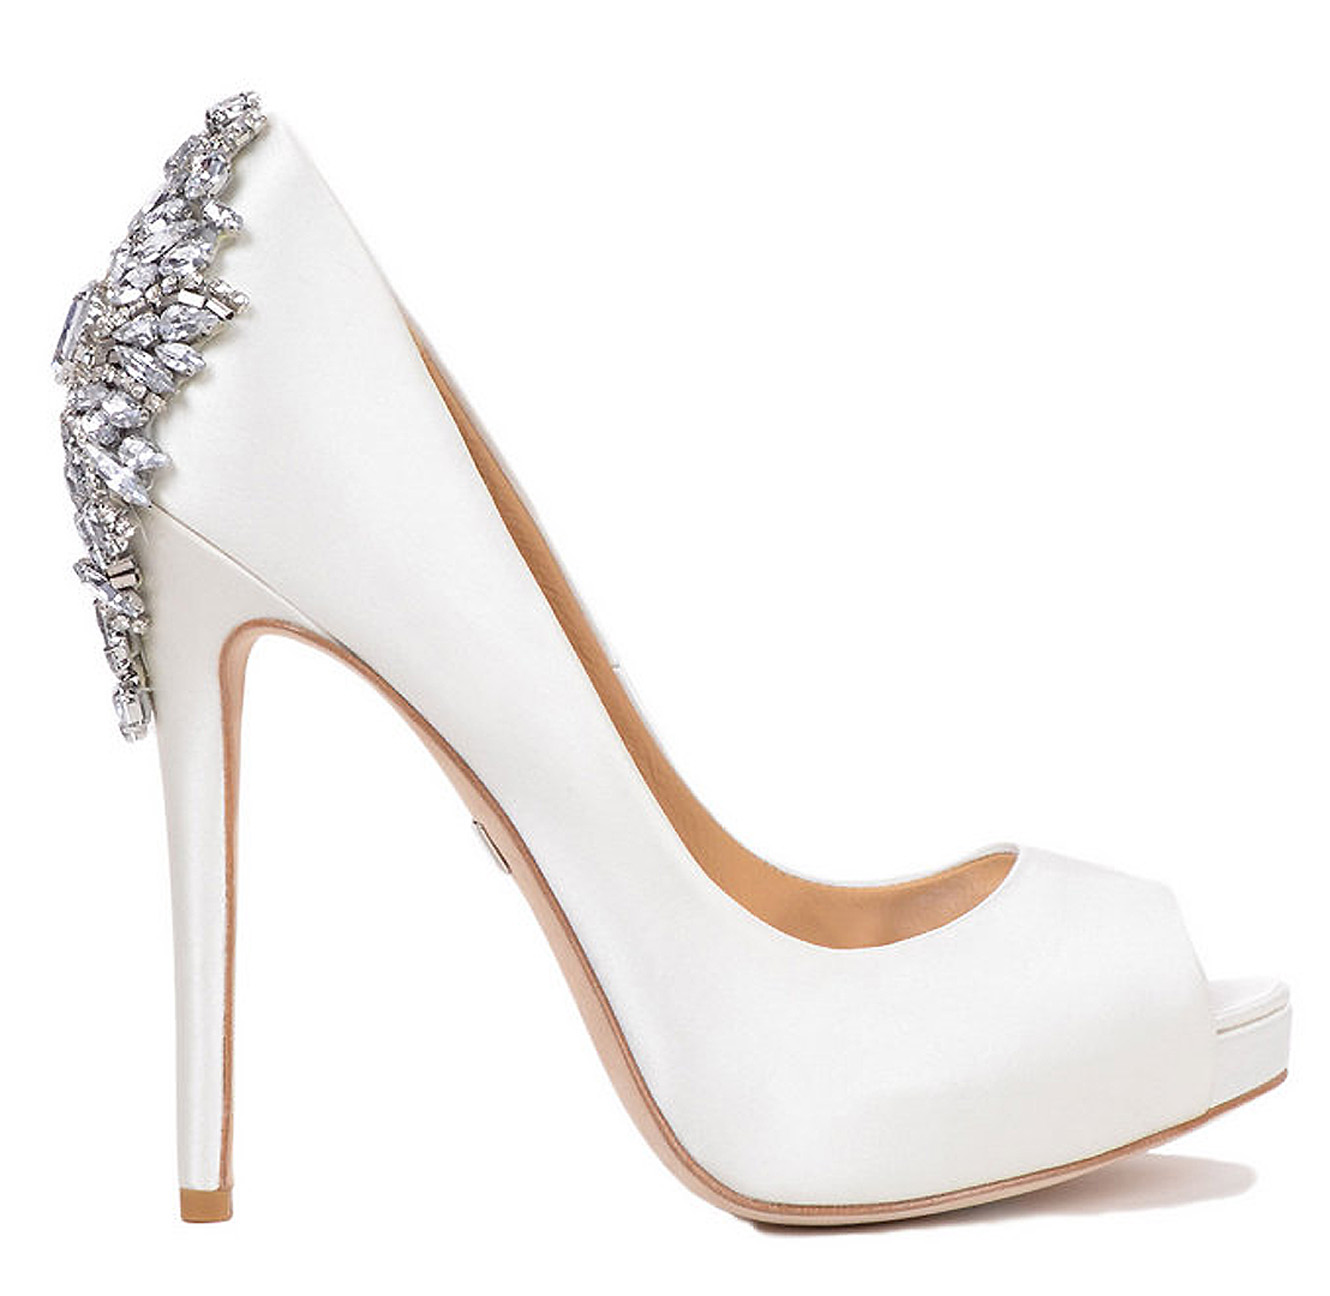 Delicate and beautiful white wedding shoes